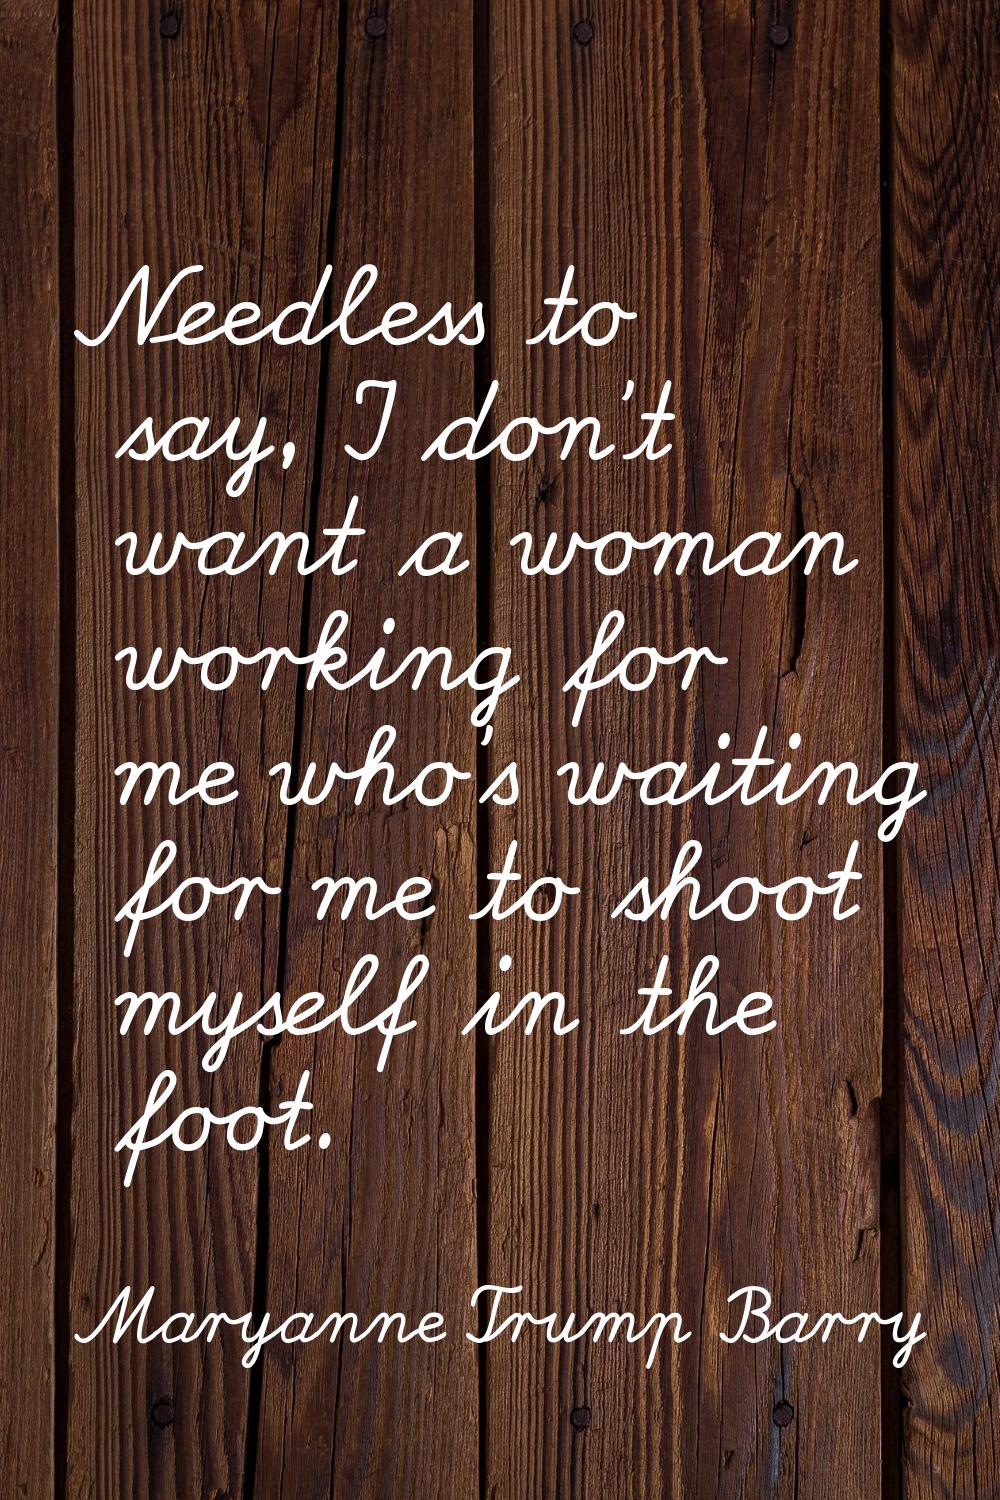 Needless to say, I don't want a woman working for me who's waiting for me to shoot myself in the fo